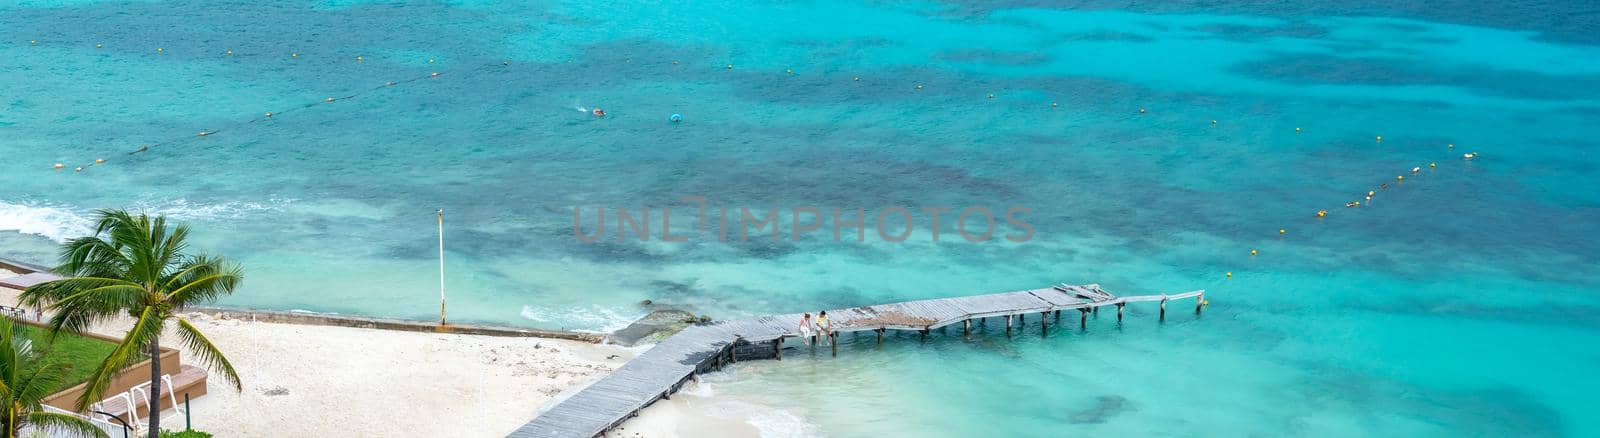 Caribbean wooden pier with turquoise aqua sea by Mariakray